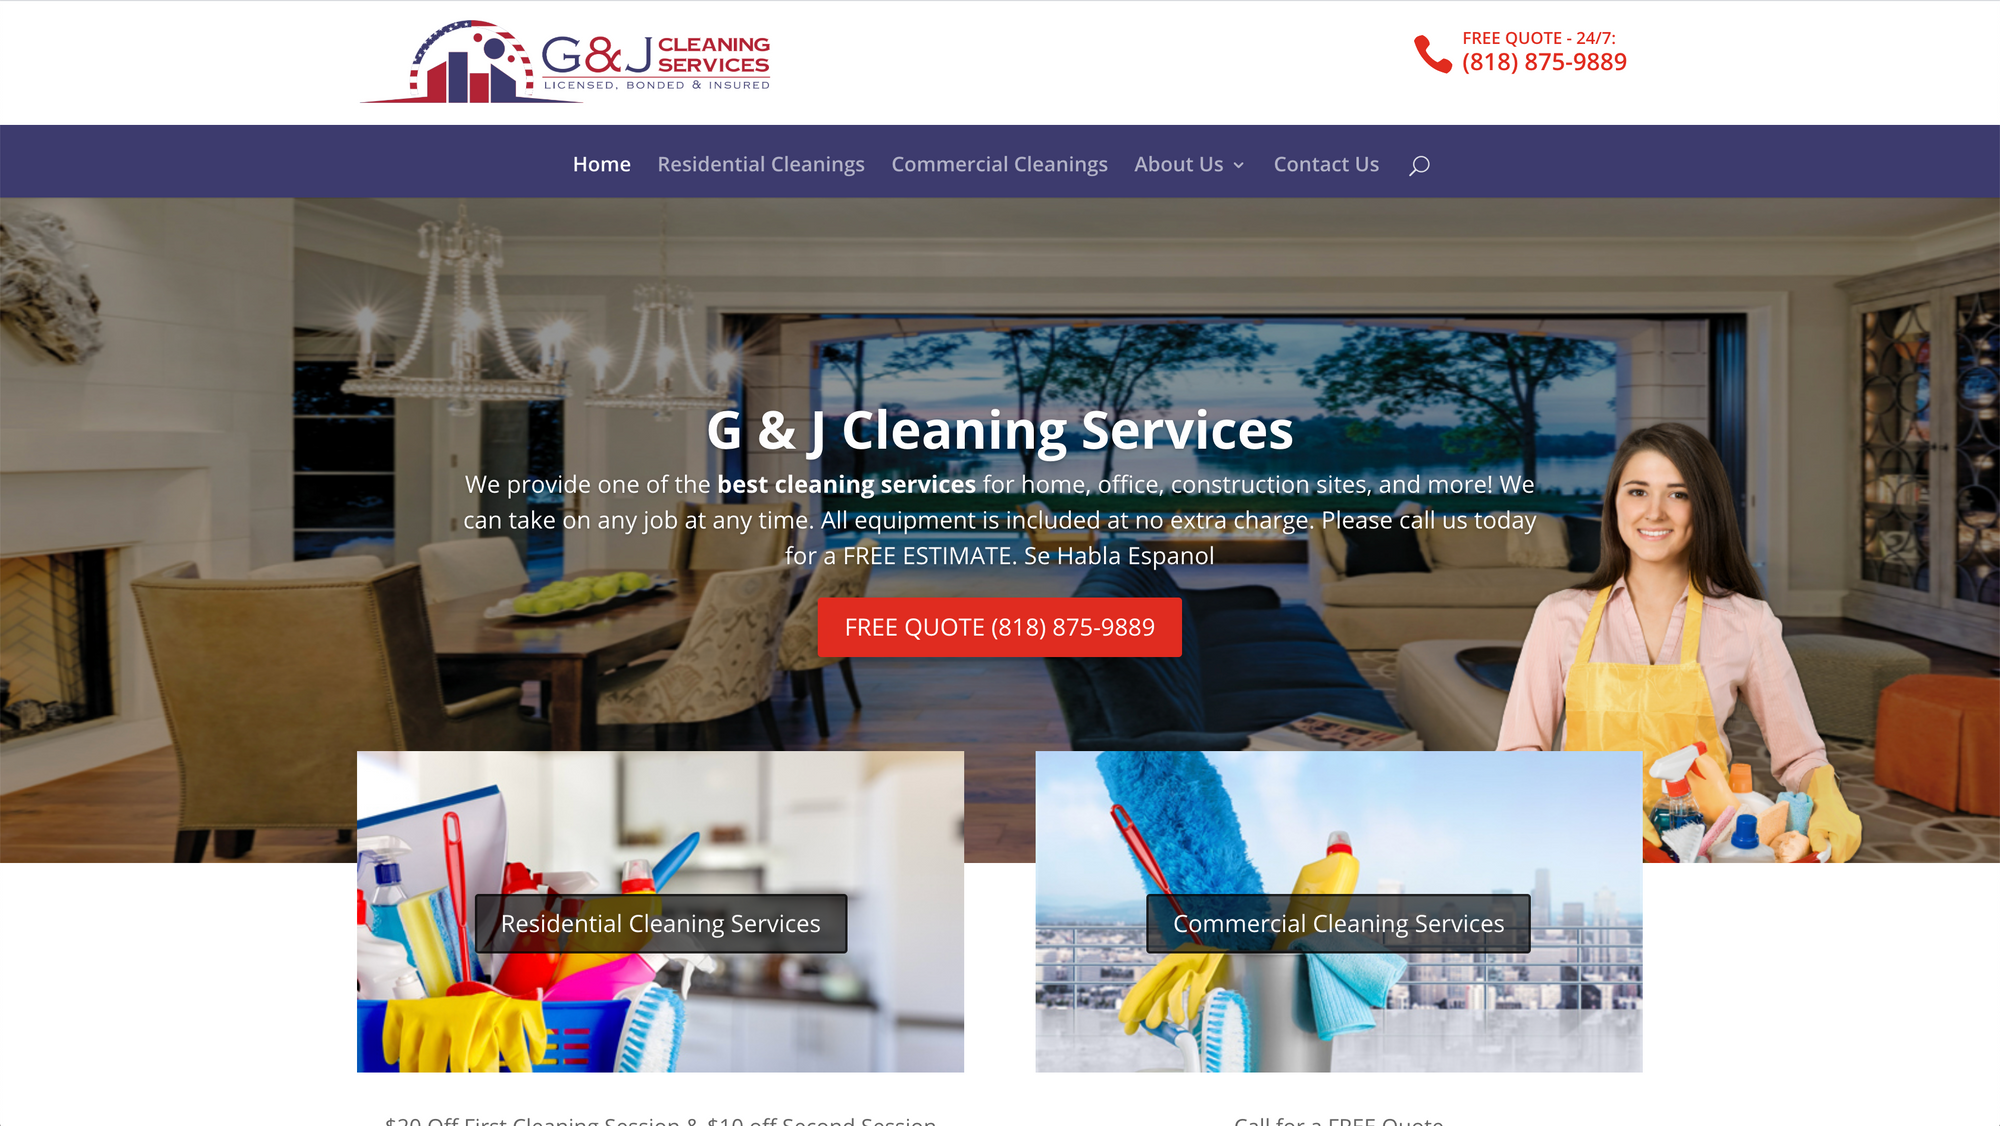 G & J Cleaning Services